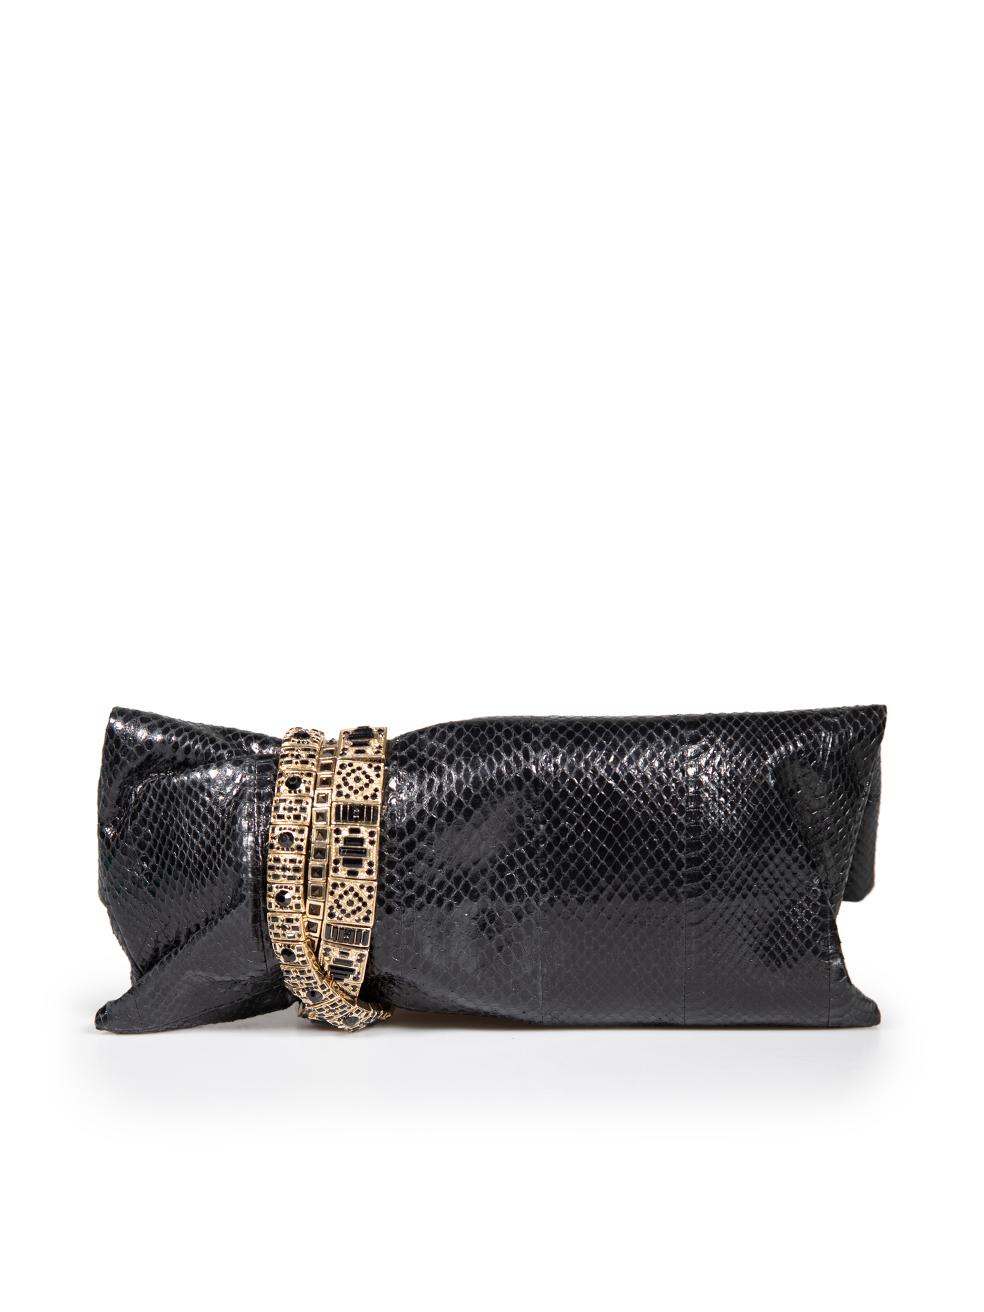 Jimmy Choo Black Snakeskin Embellished Clutch In Good Condition For Sale In London, GB